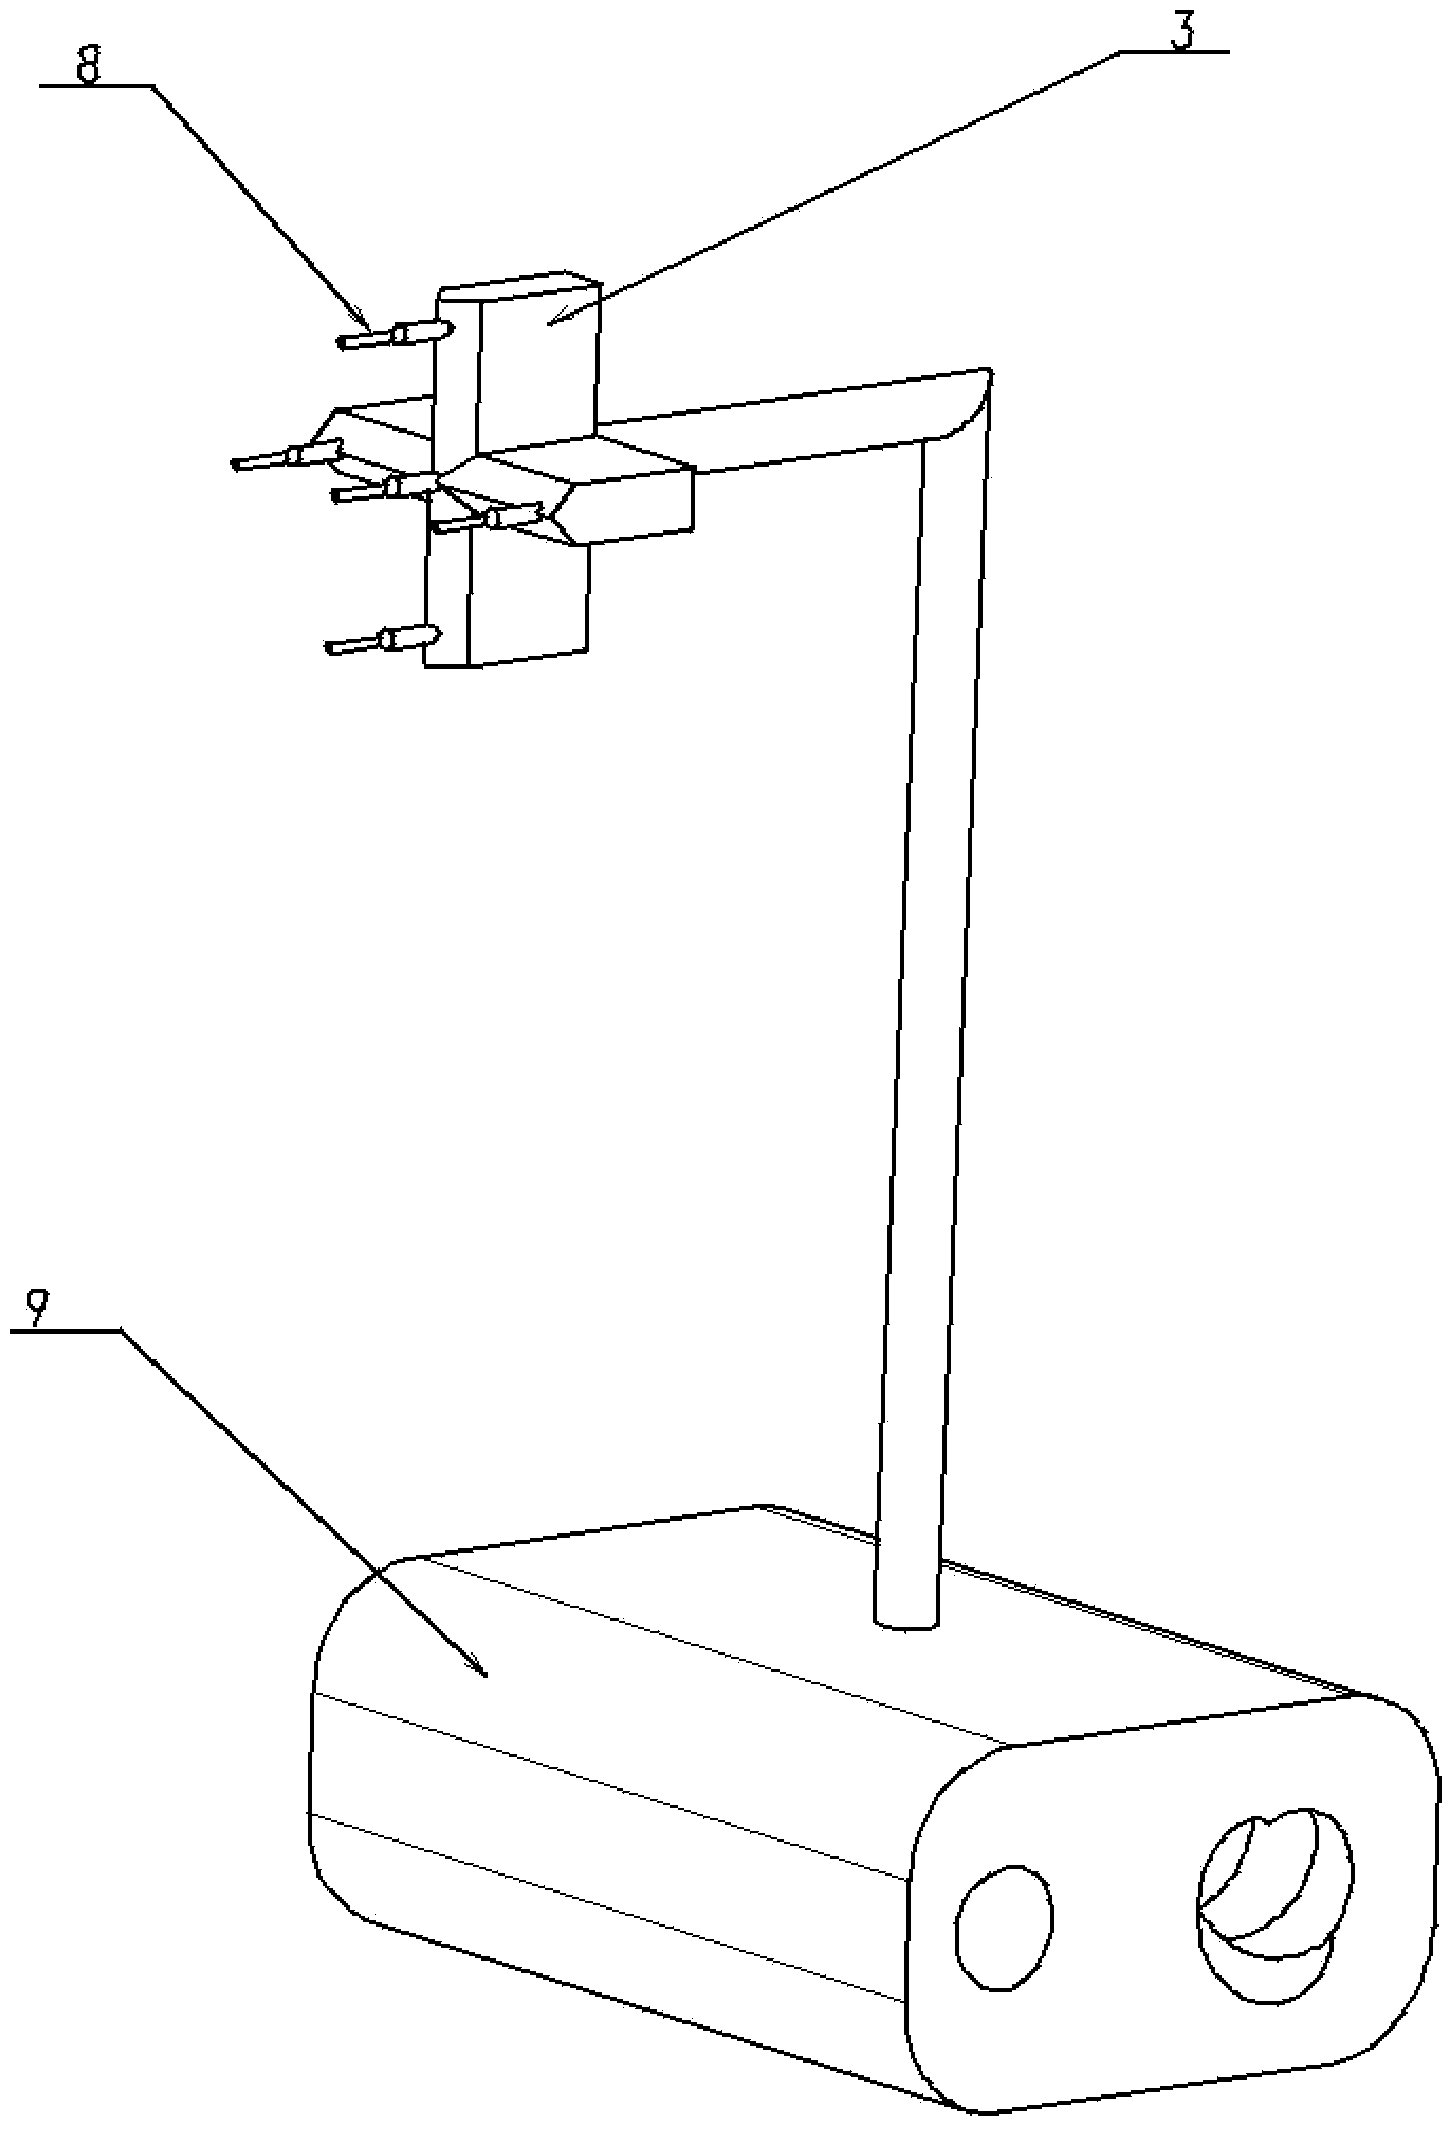 Indirect measuring method for hypersonic speed wind tunnel turbulence scale